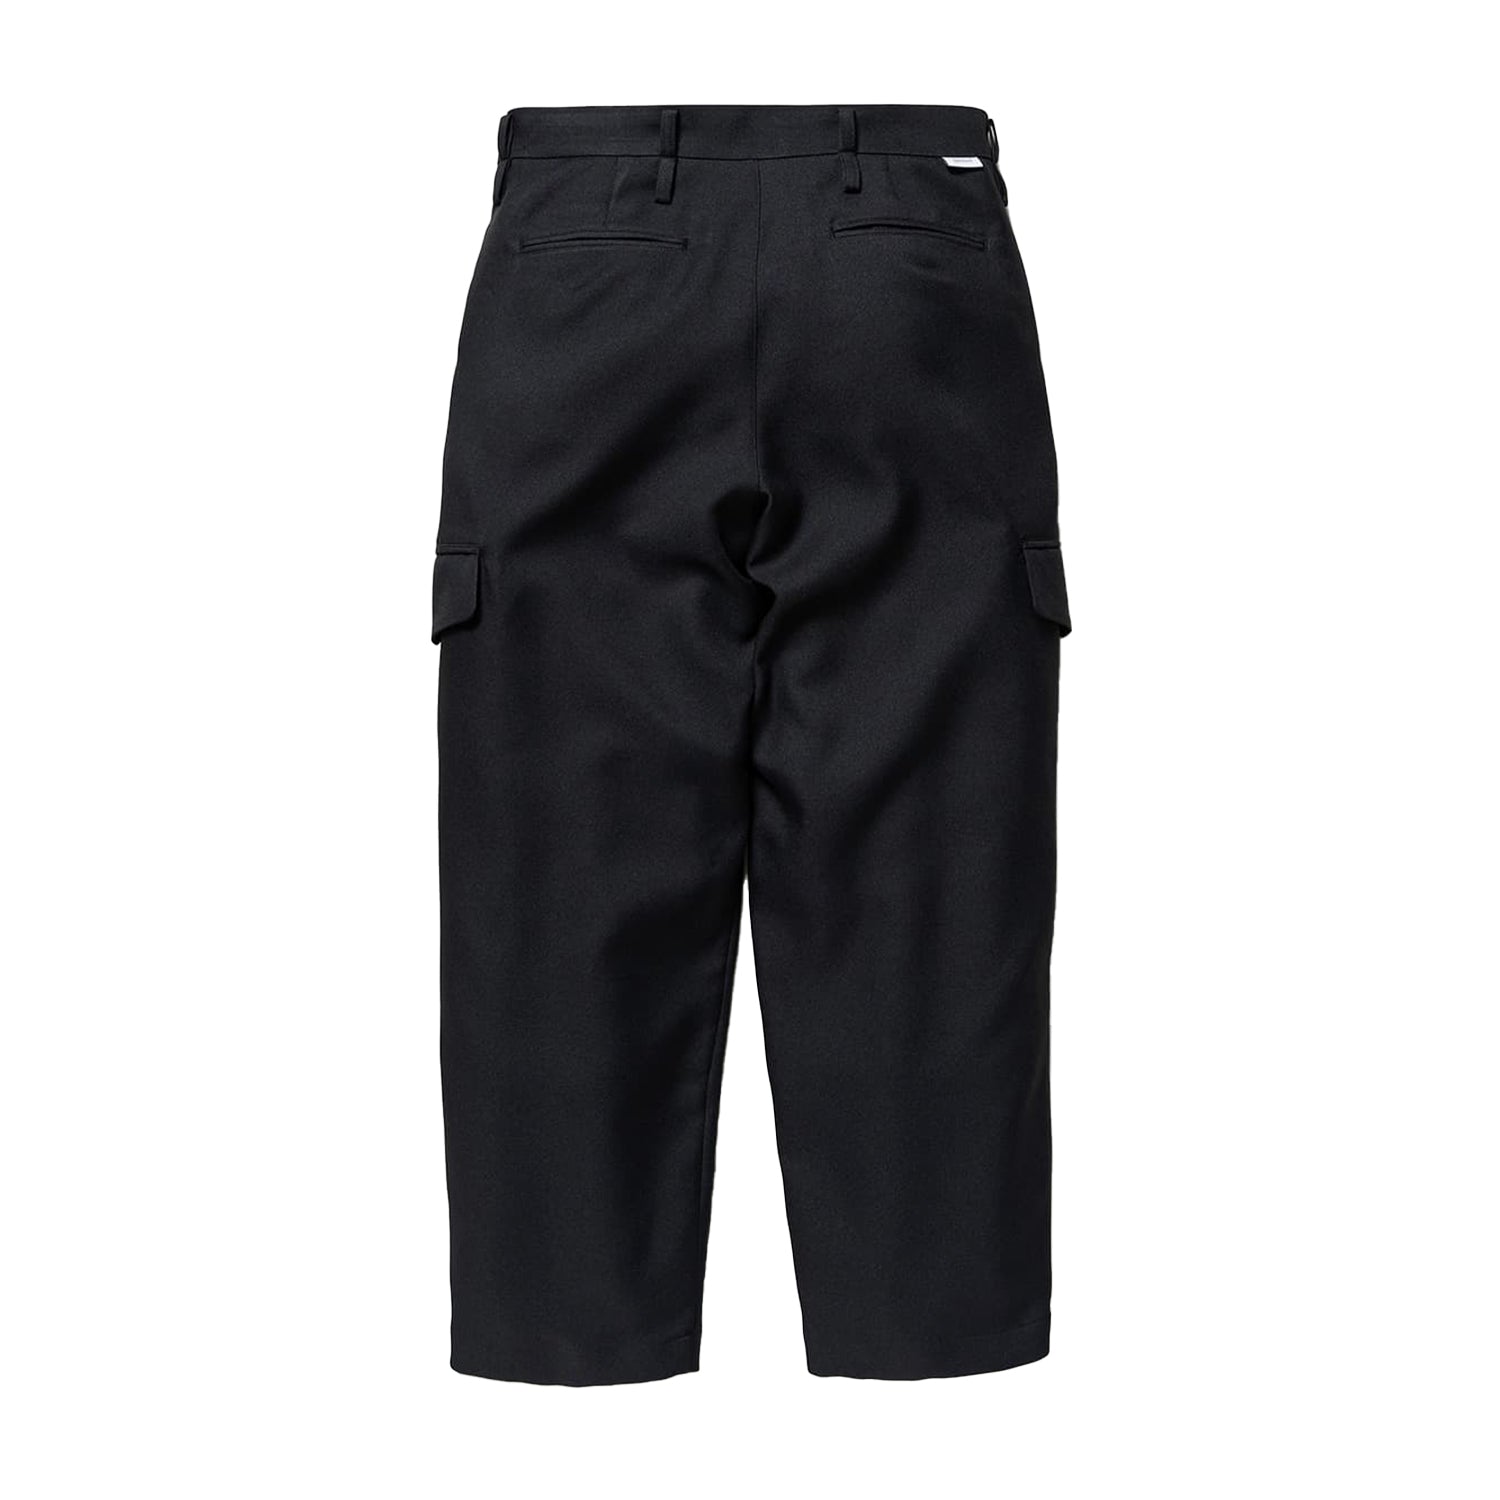 Lez / Bury / Trousers / Poly. Twill - INVINCIBLE